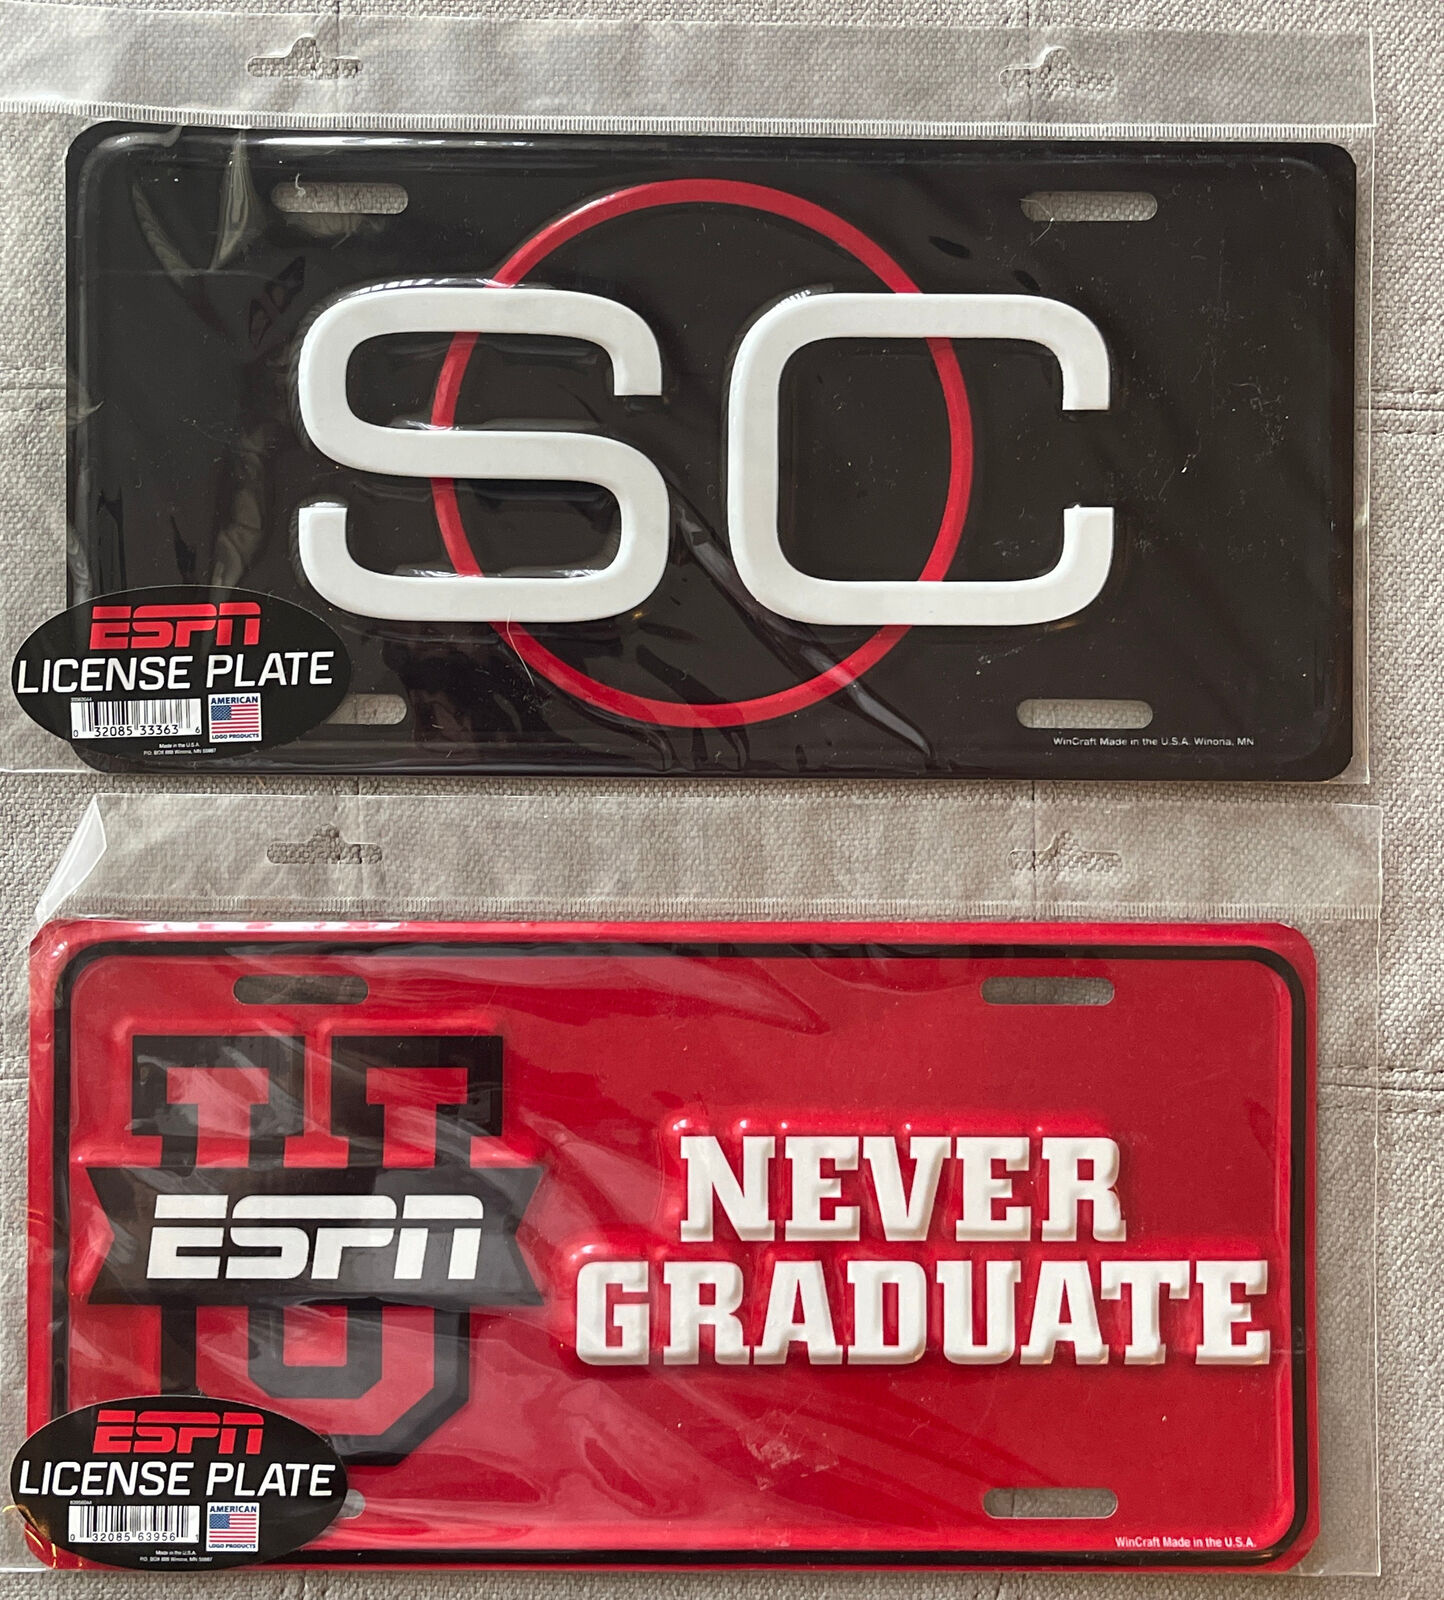 Two (2) ESPN License Plate Signs - NEW